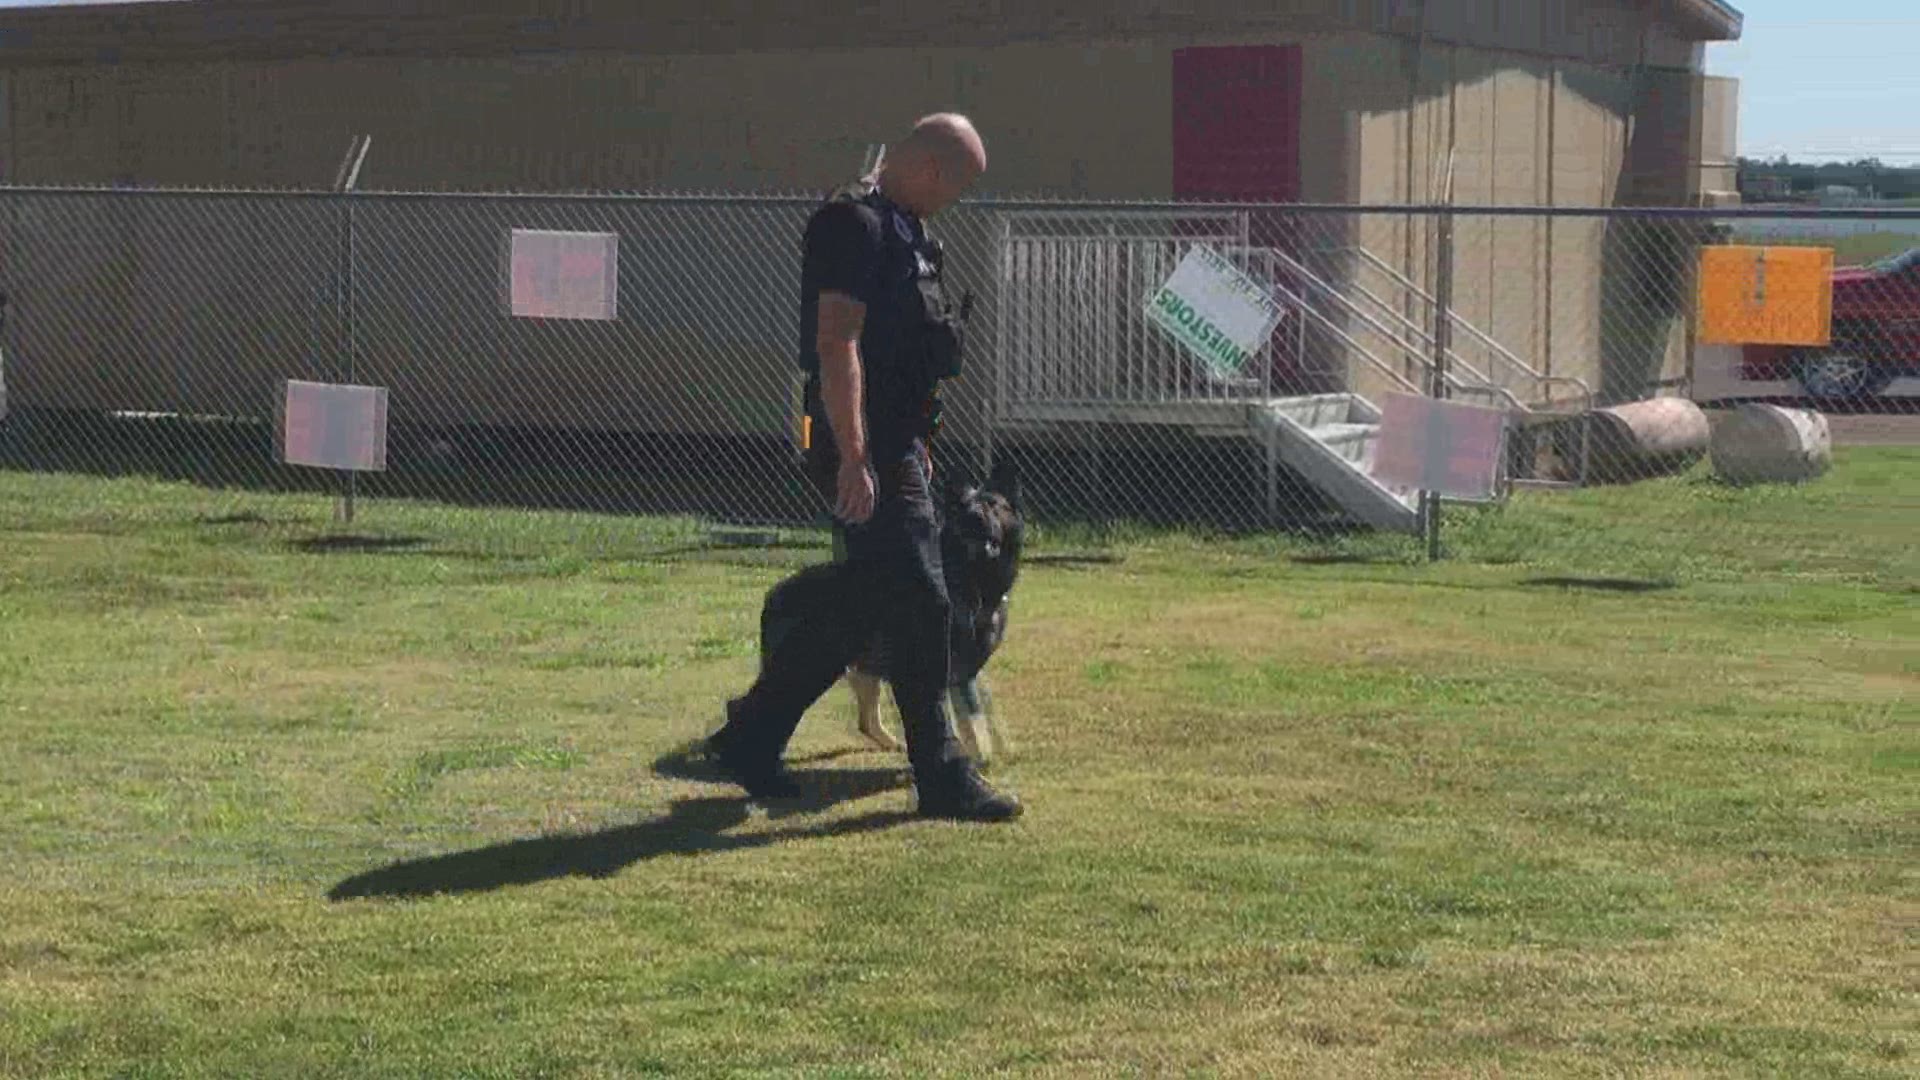 K-9 Titan gets some exercise as he waits for his broken leg to heal.